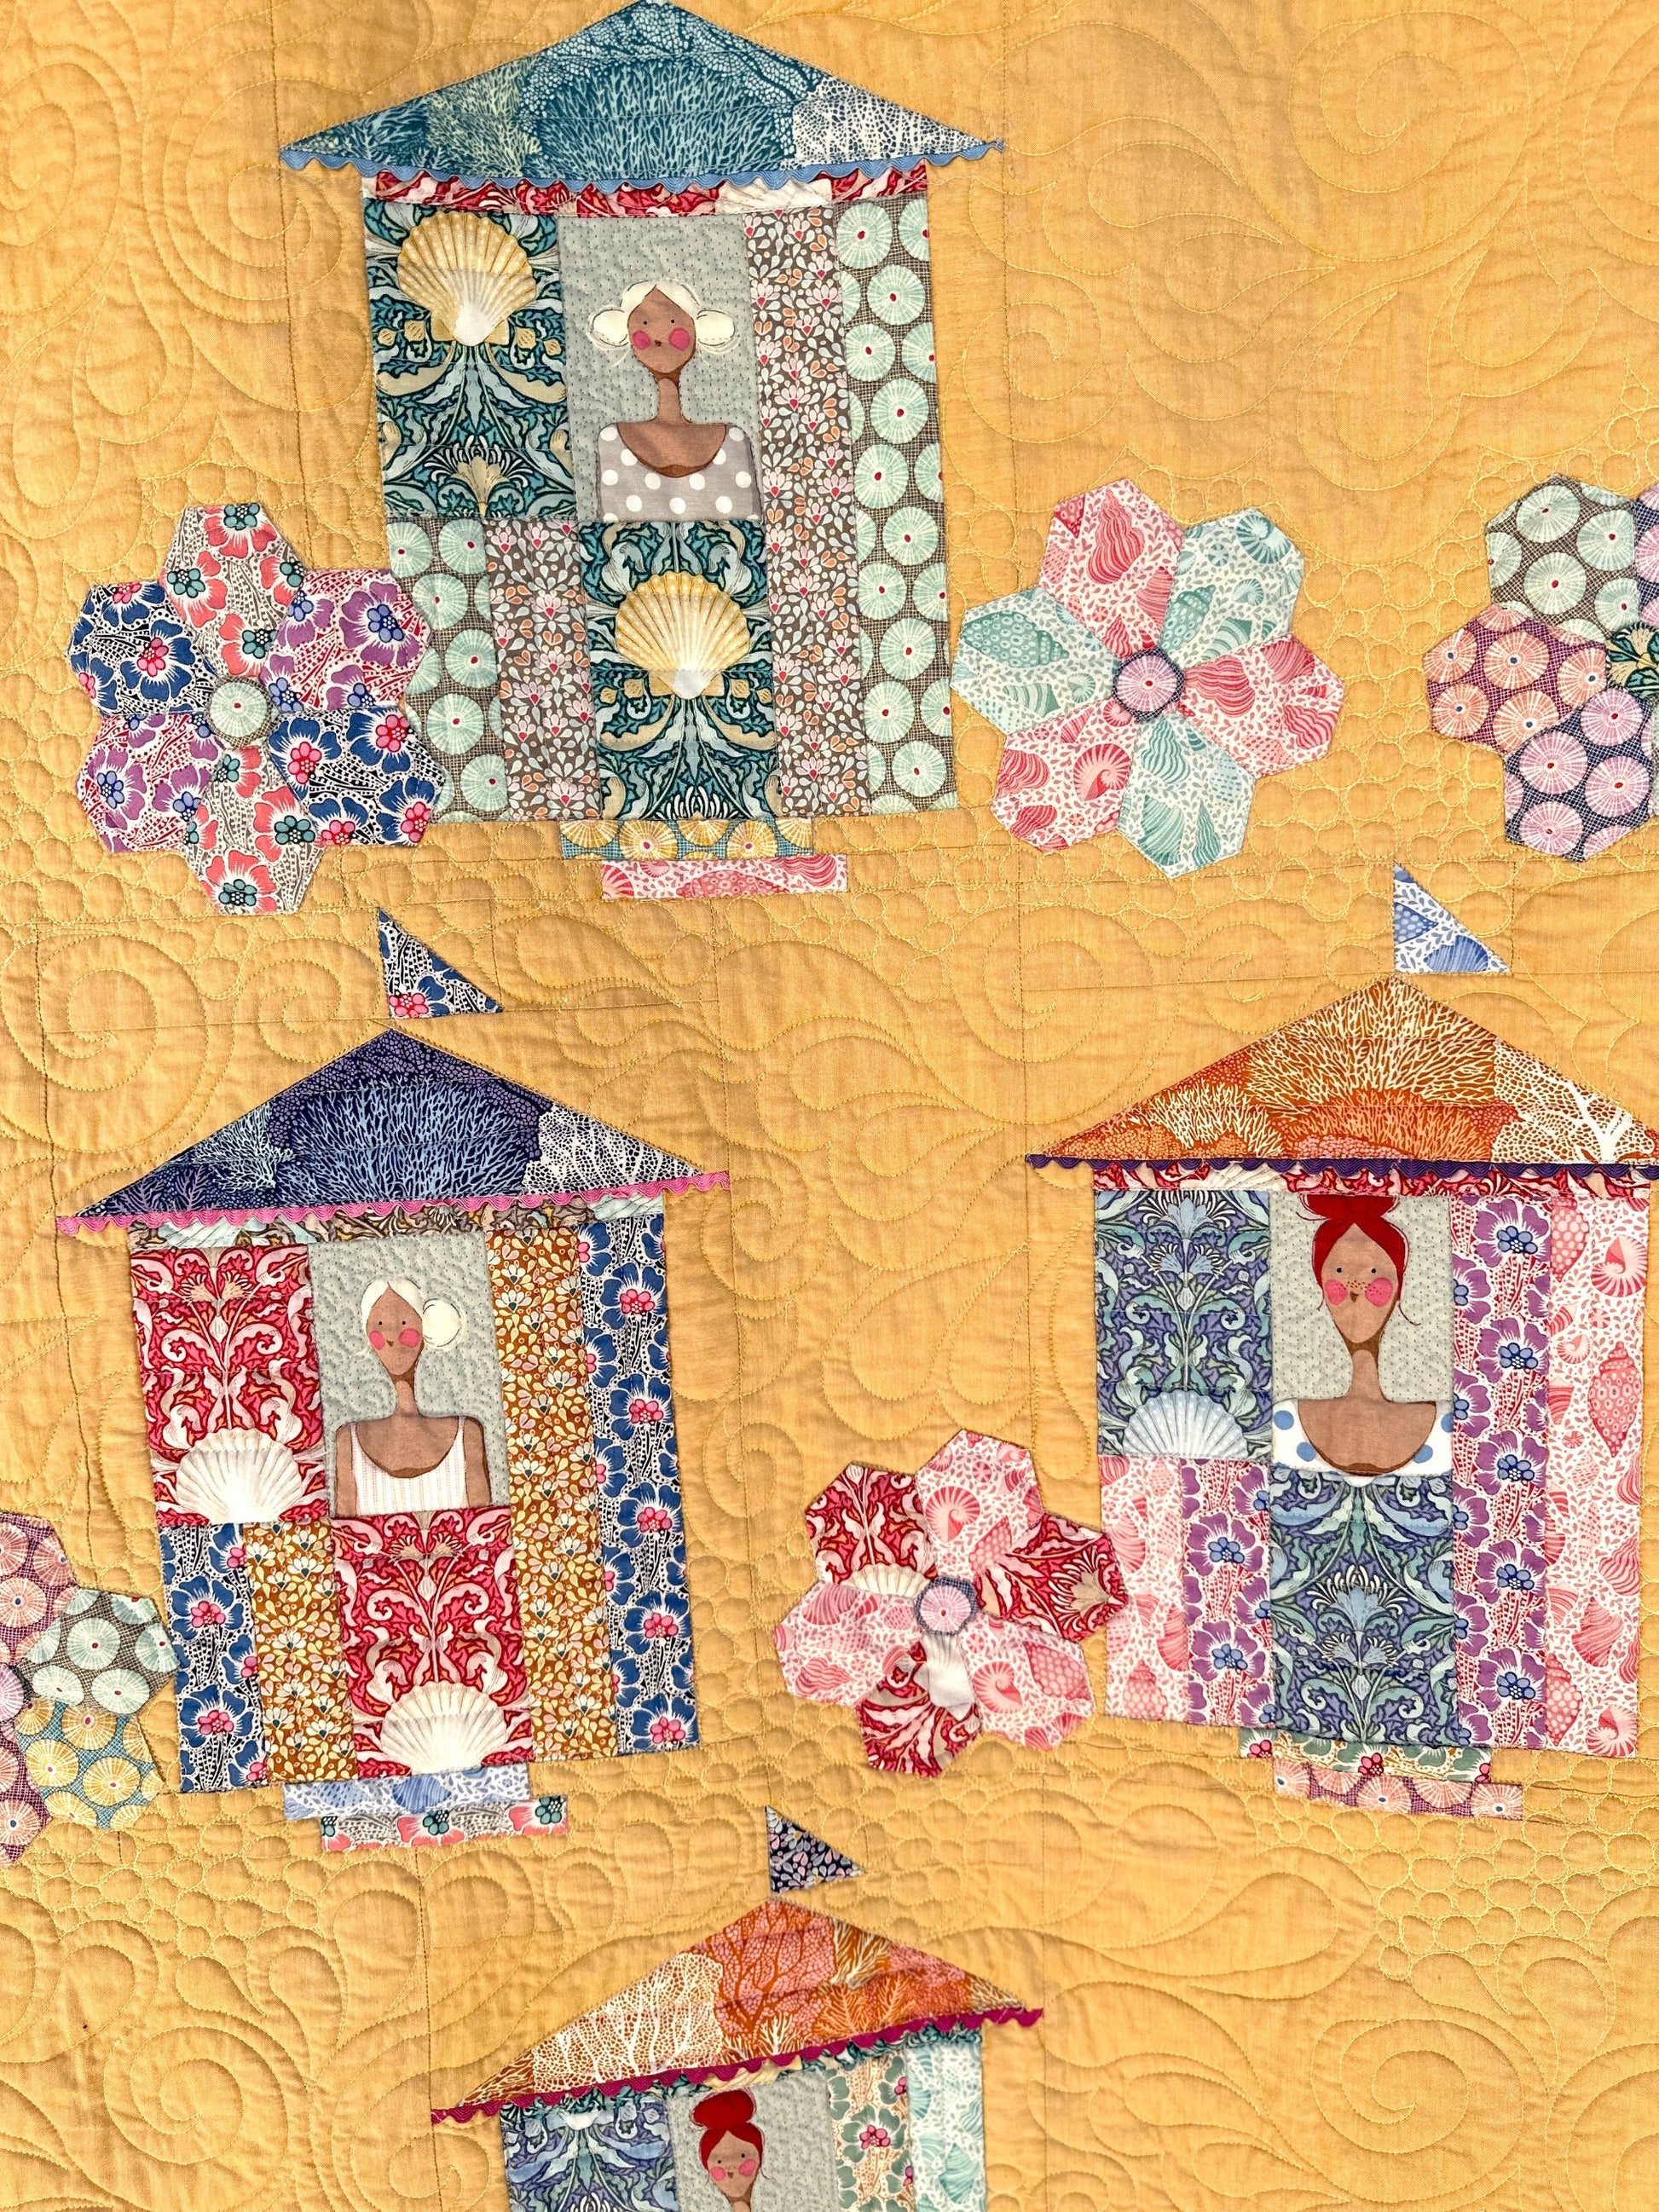 detail houses whole quilt image using Tilda fabrics -Quilt Pattern Beach House Beauties - make it sew for sale at 2 sew textiles art quilt supplies used Tilda fabrics. or Kaffe.